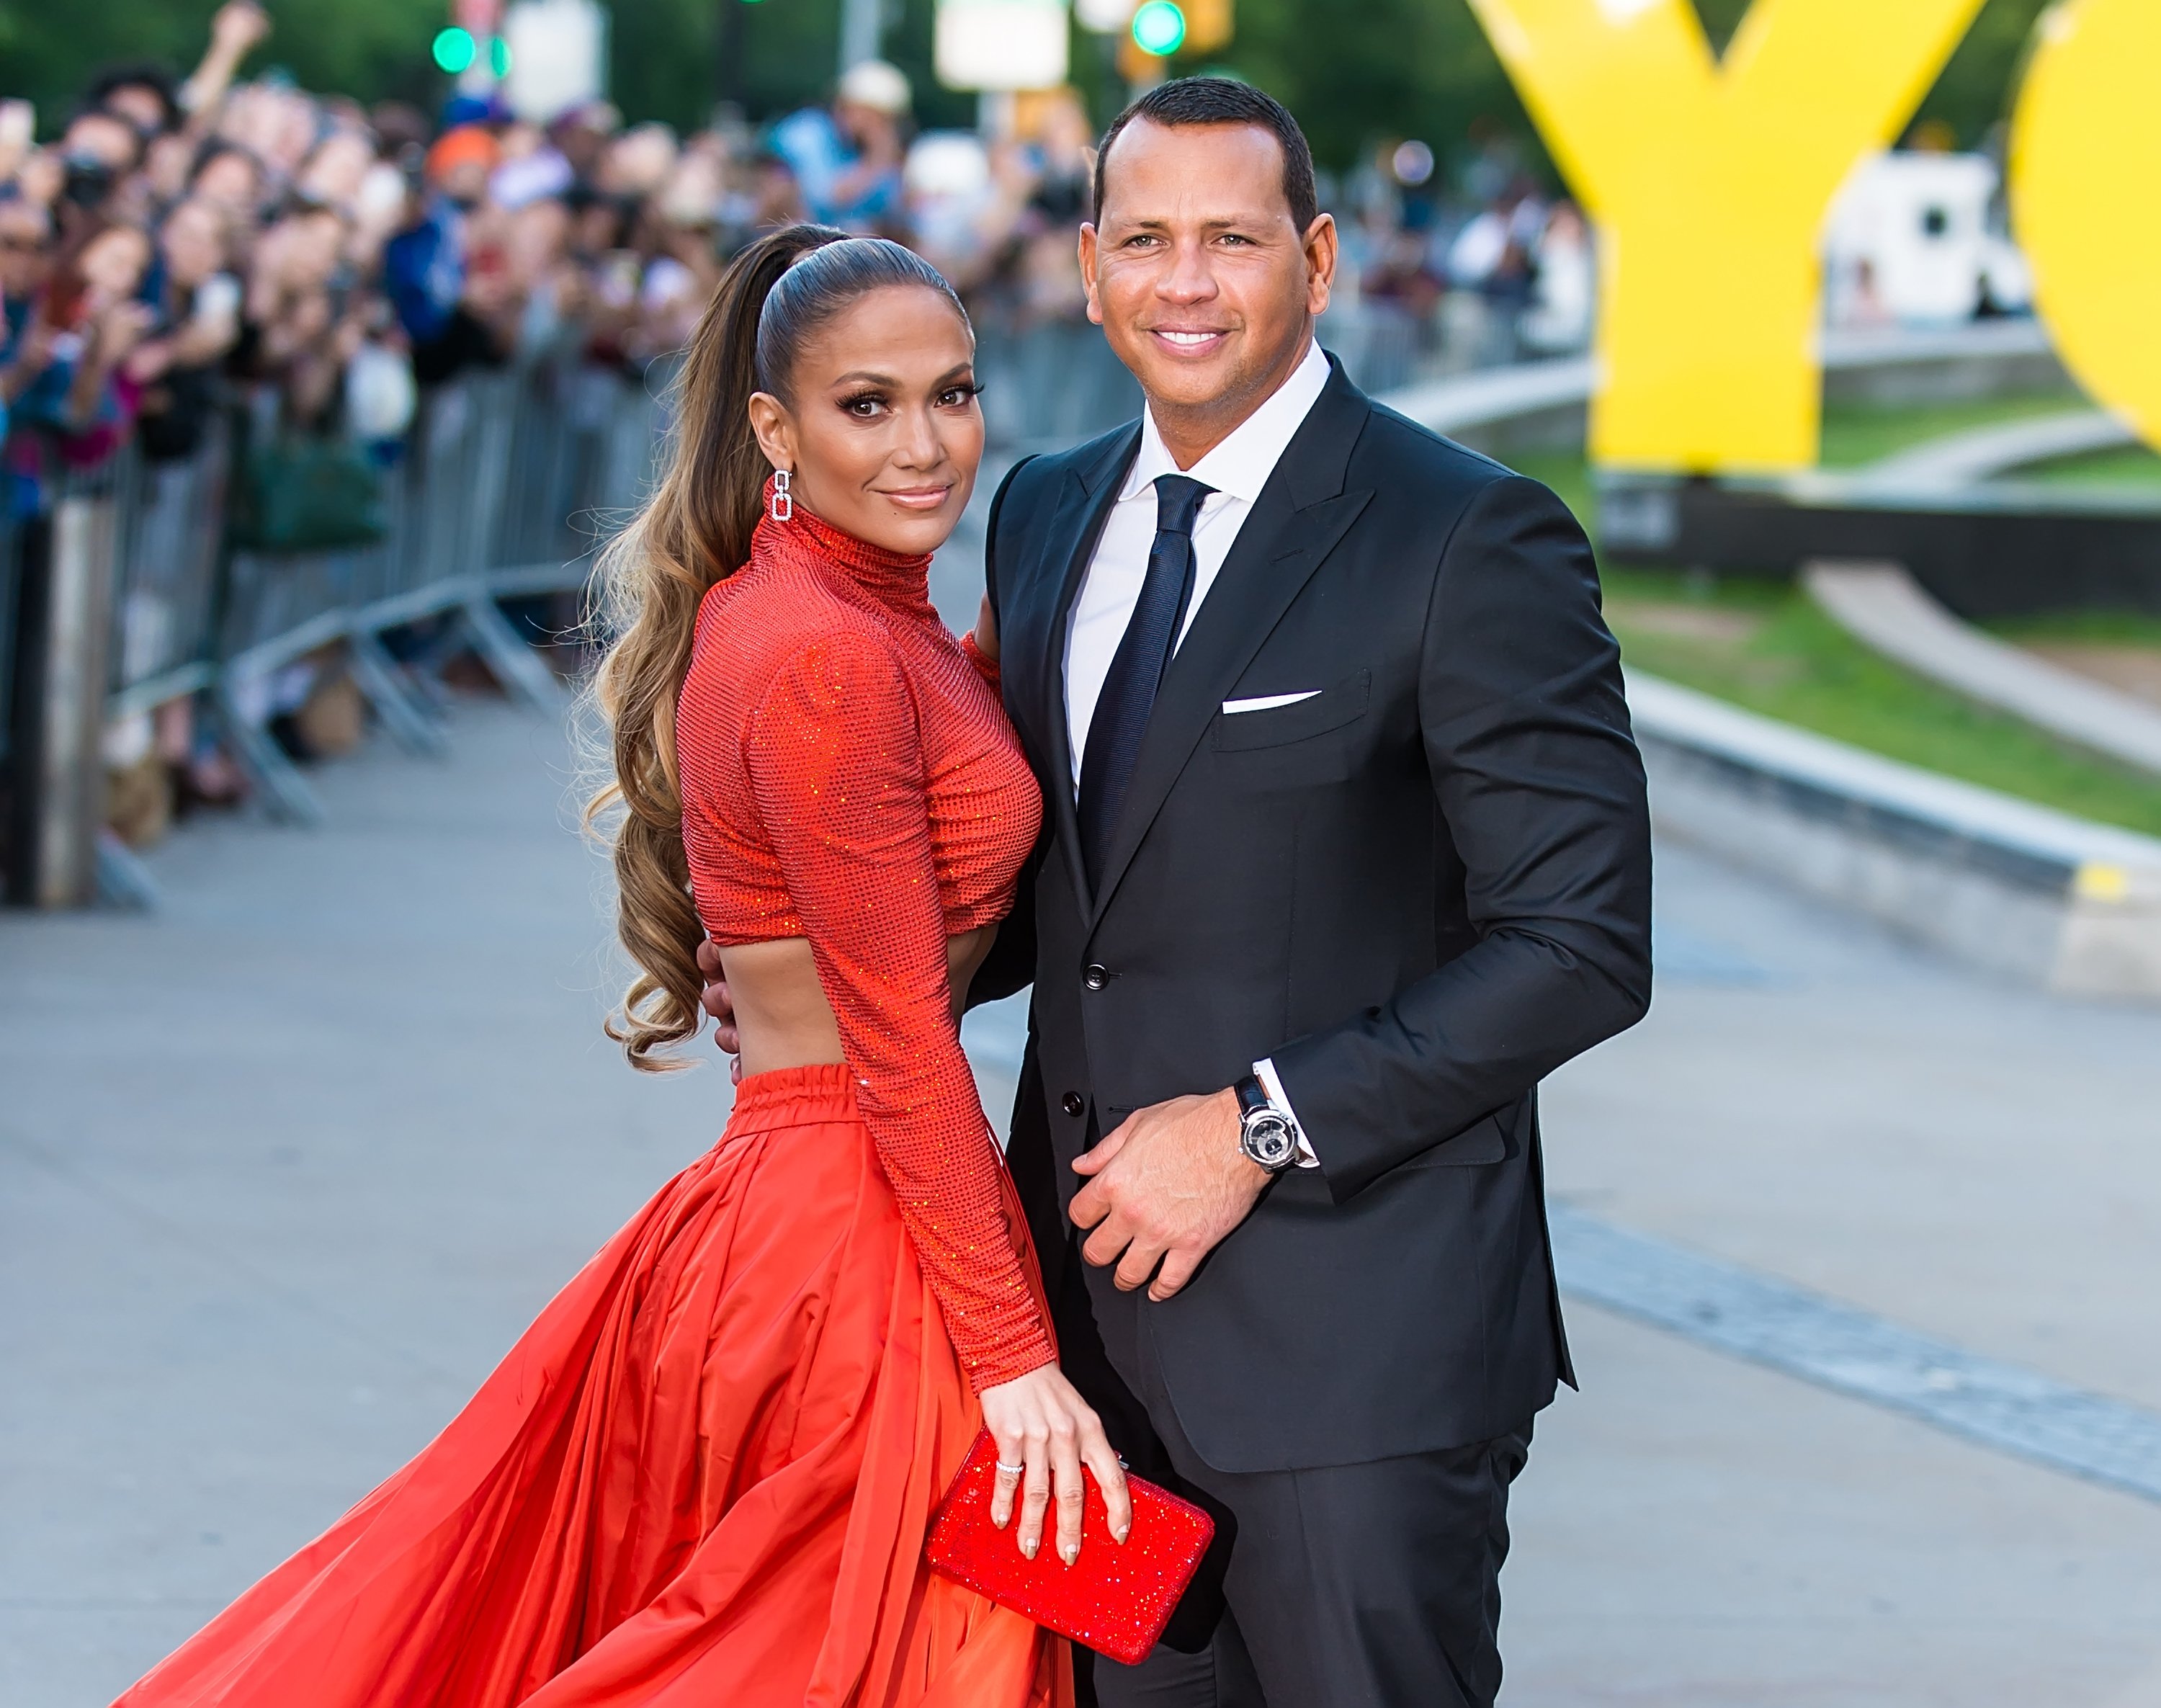  Jennifer Lopez and Alex Rodriguez are seen arriving to the 2019 CFDA Fashion Awards on June 3, 2019 in New York City | Photo: GettyImages